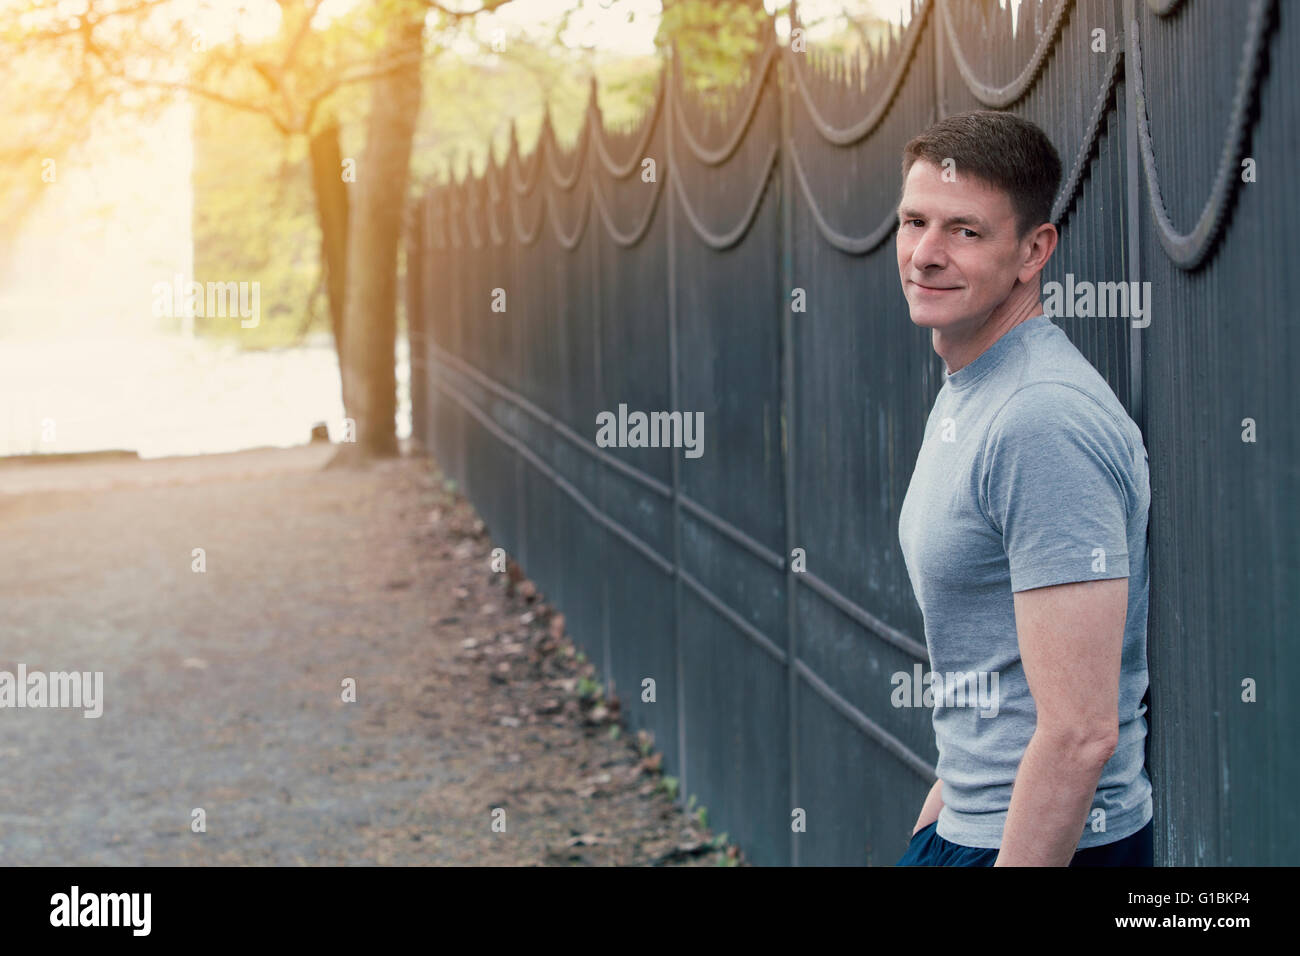 portrait of man in tshirt standing outside near a fence in nature Stock Photo